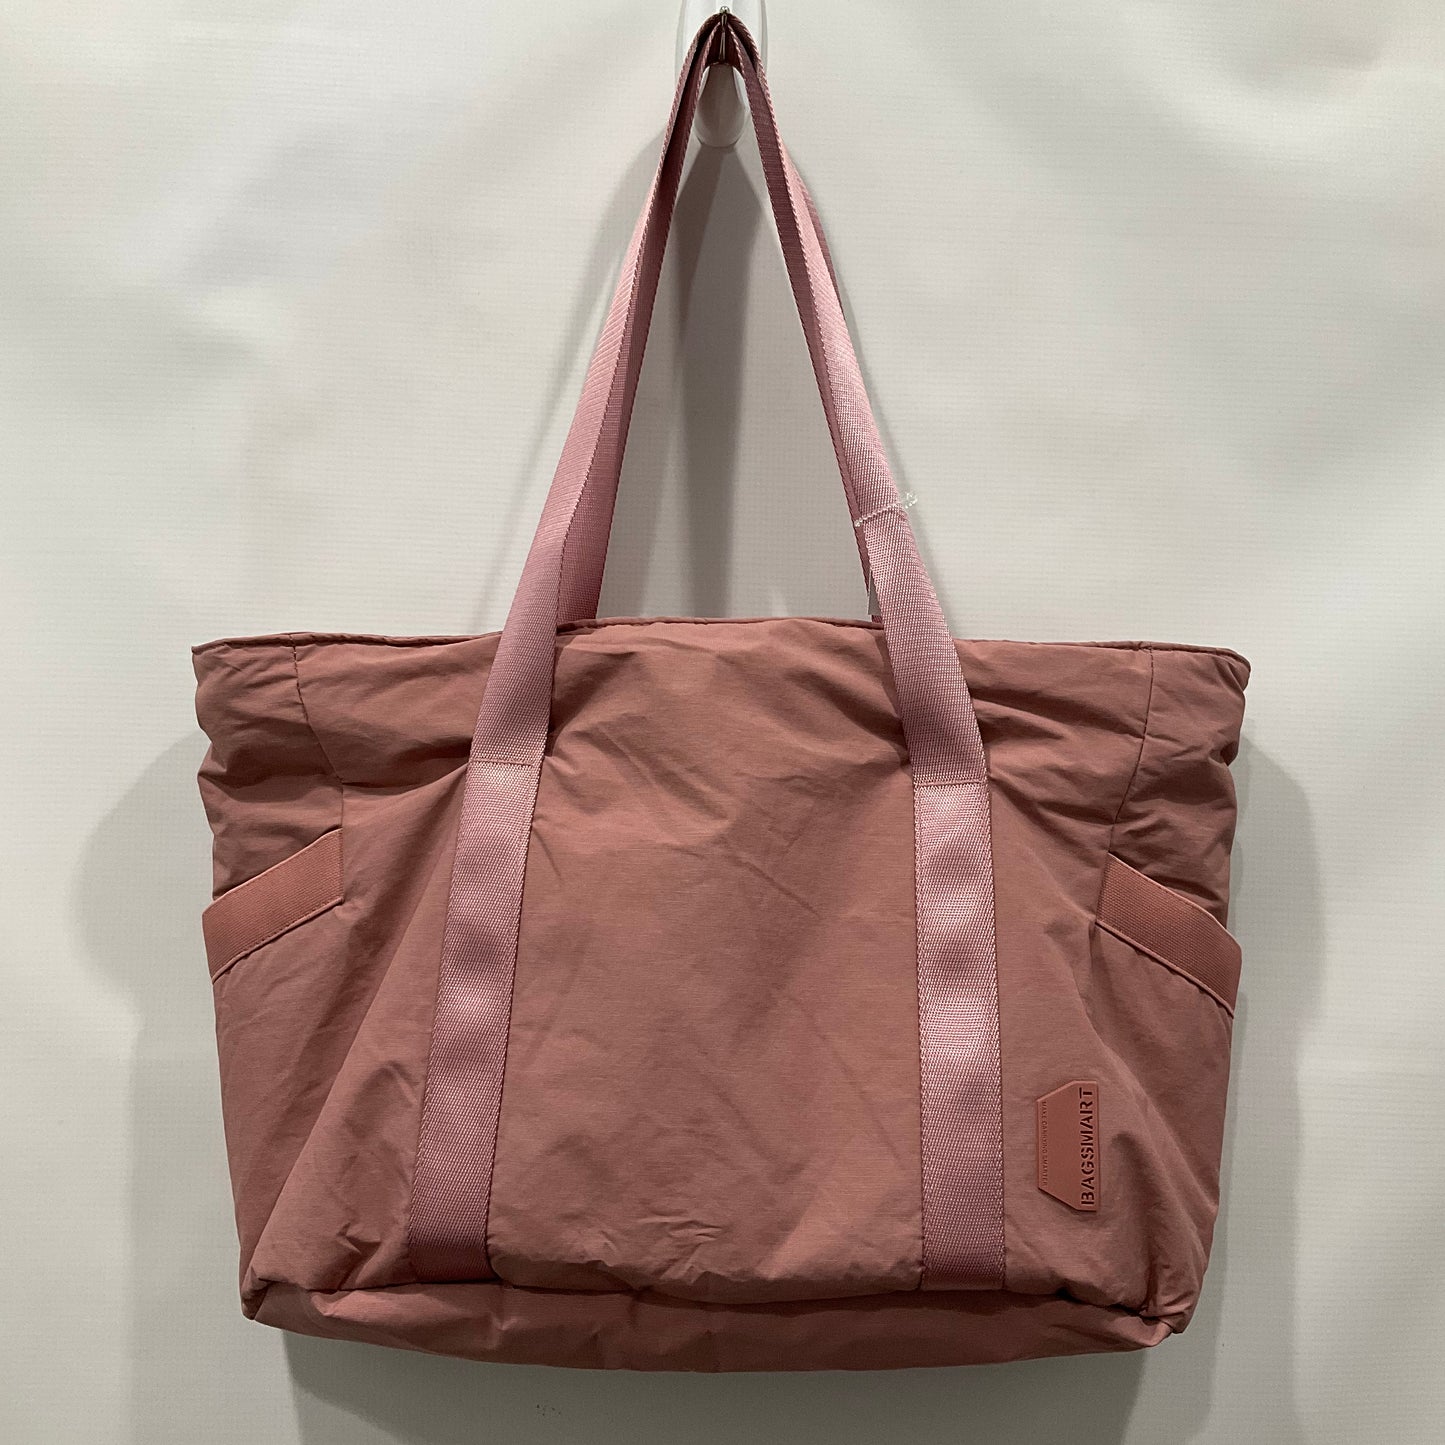 Tote By bagsmart Size: Large